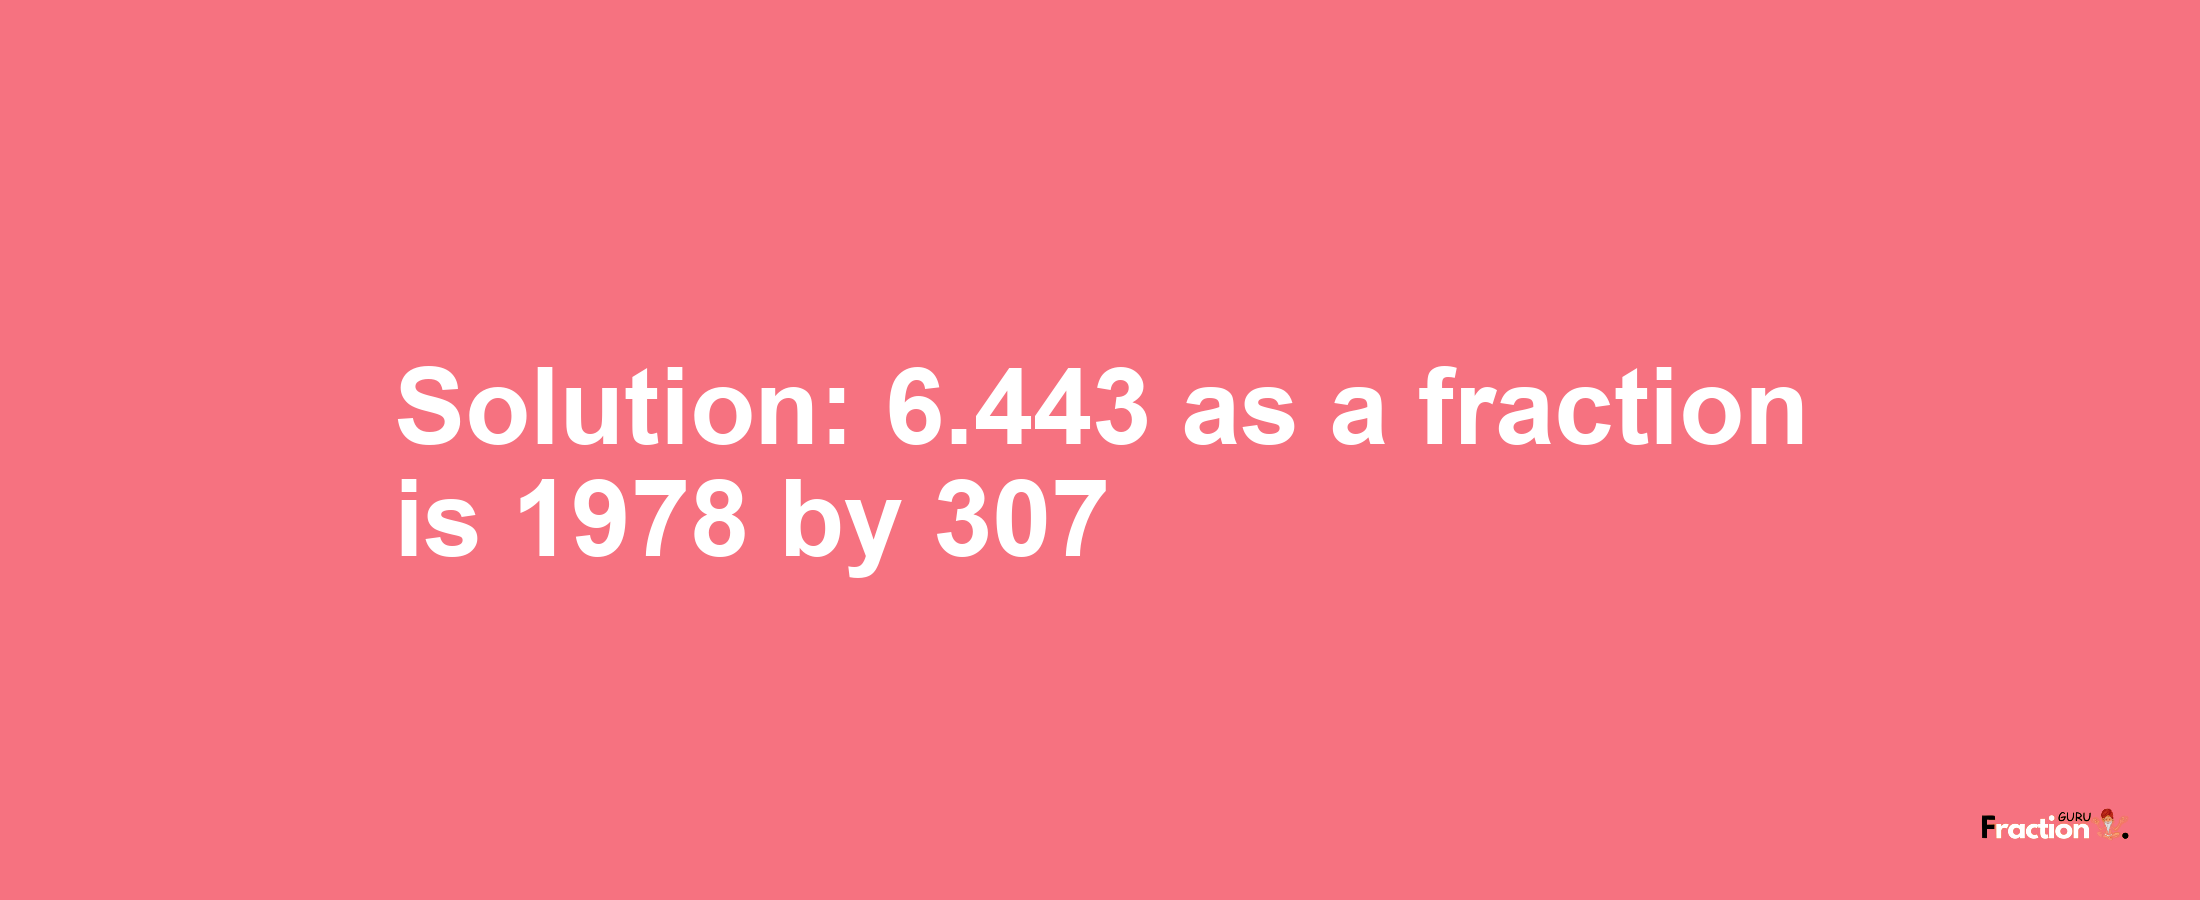 Solution:6.443 as a fraction is 1978/307